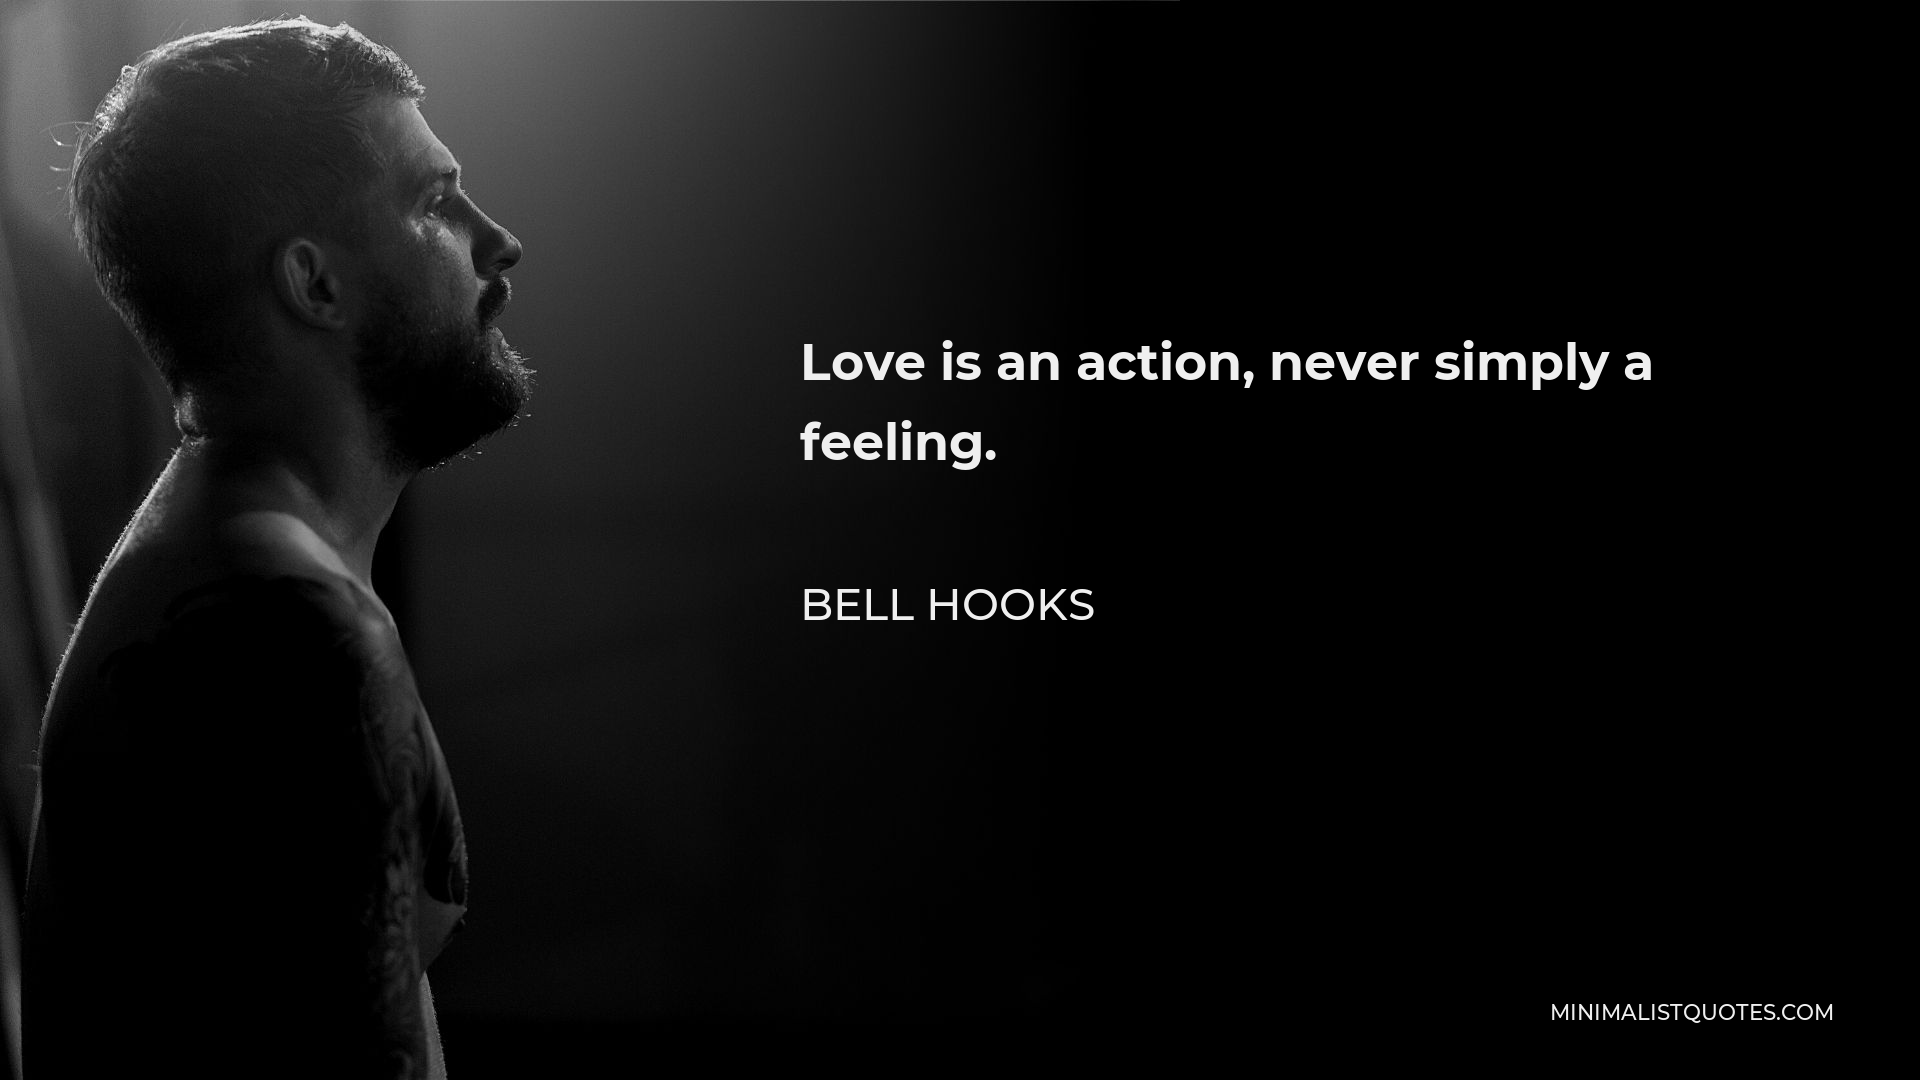 Bell Hooks Quote - Love is an action, never simply a feeling.